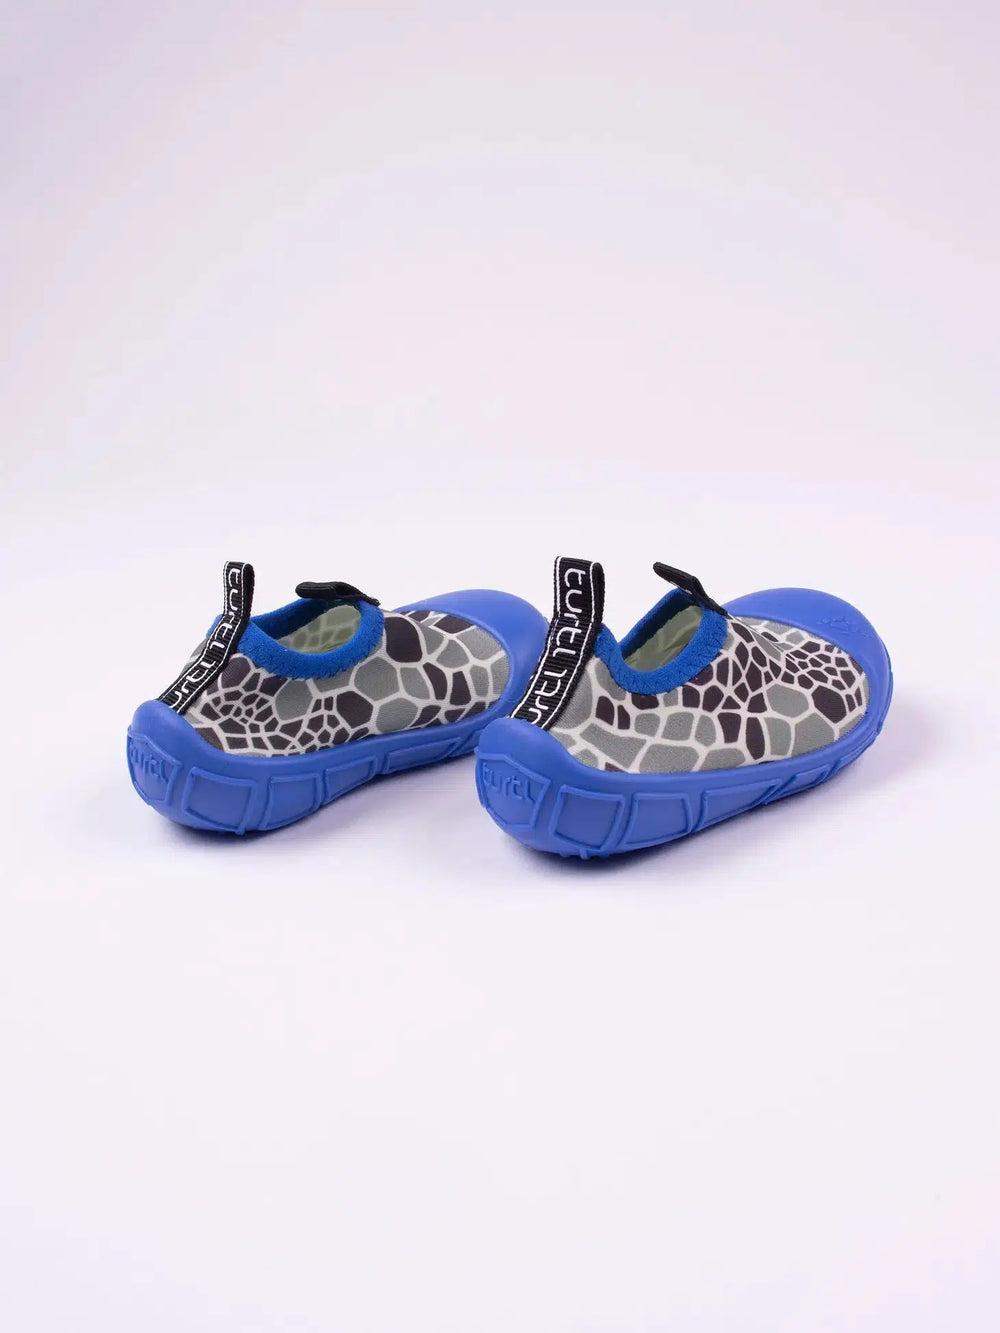 TURTL Aqua Shoes in blue with turtle shell print